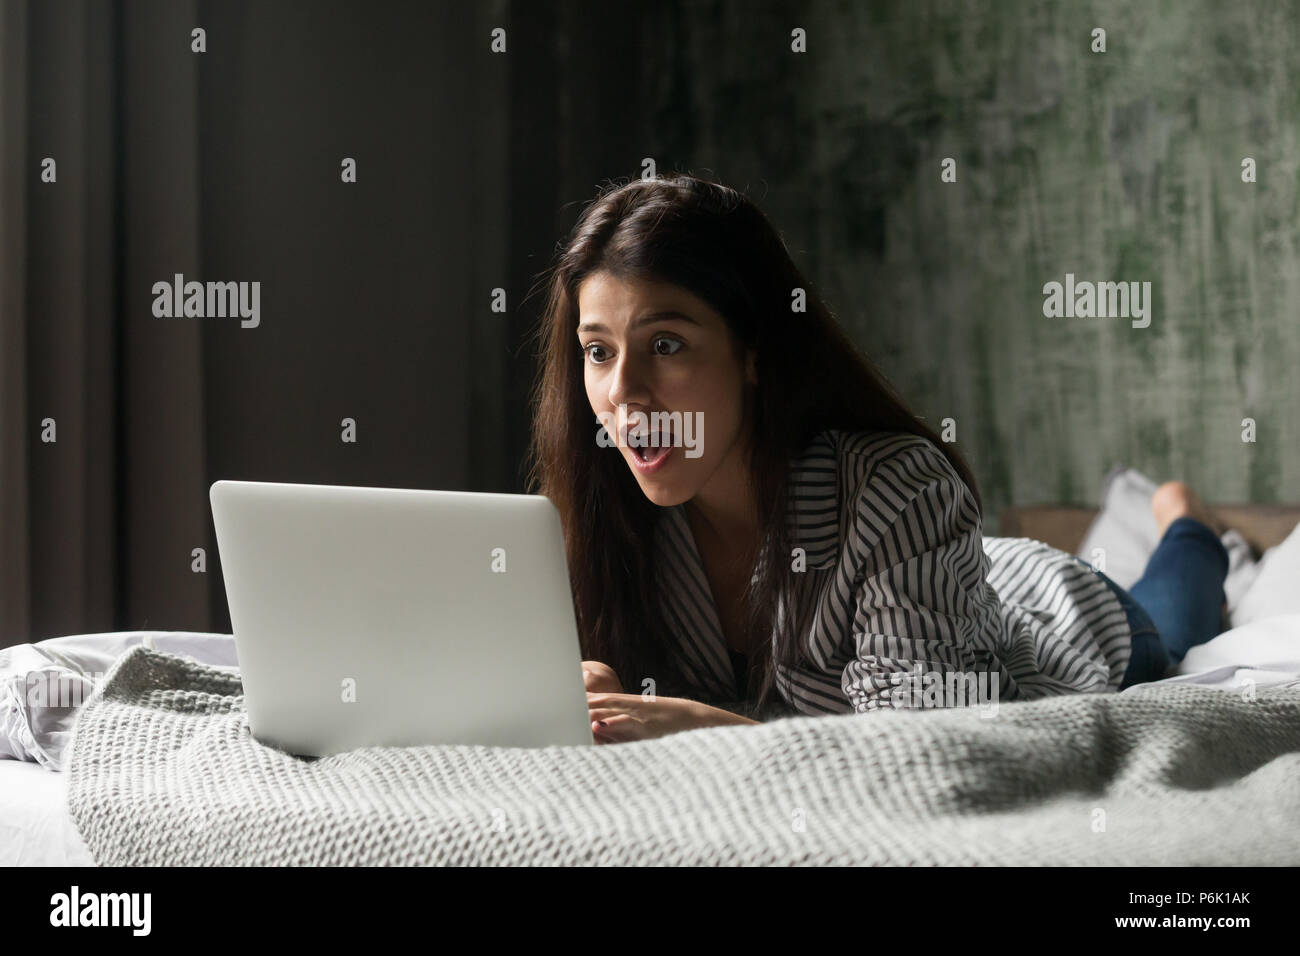 Surprised girl shocked receiving unexpected message at laptop Stock Photo